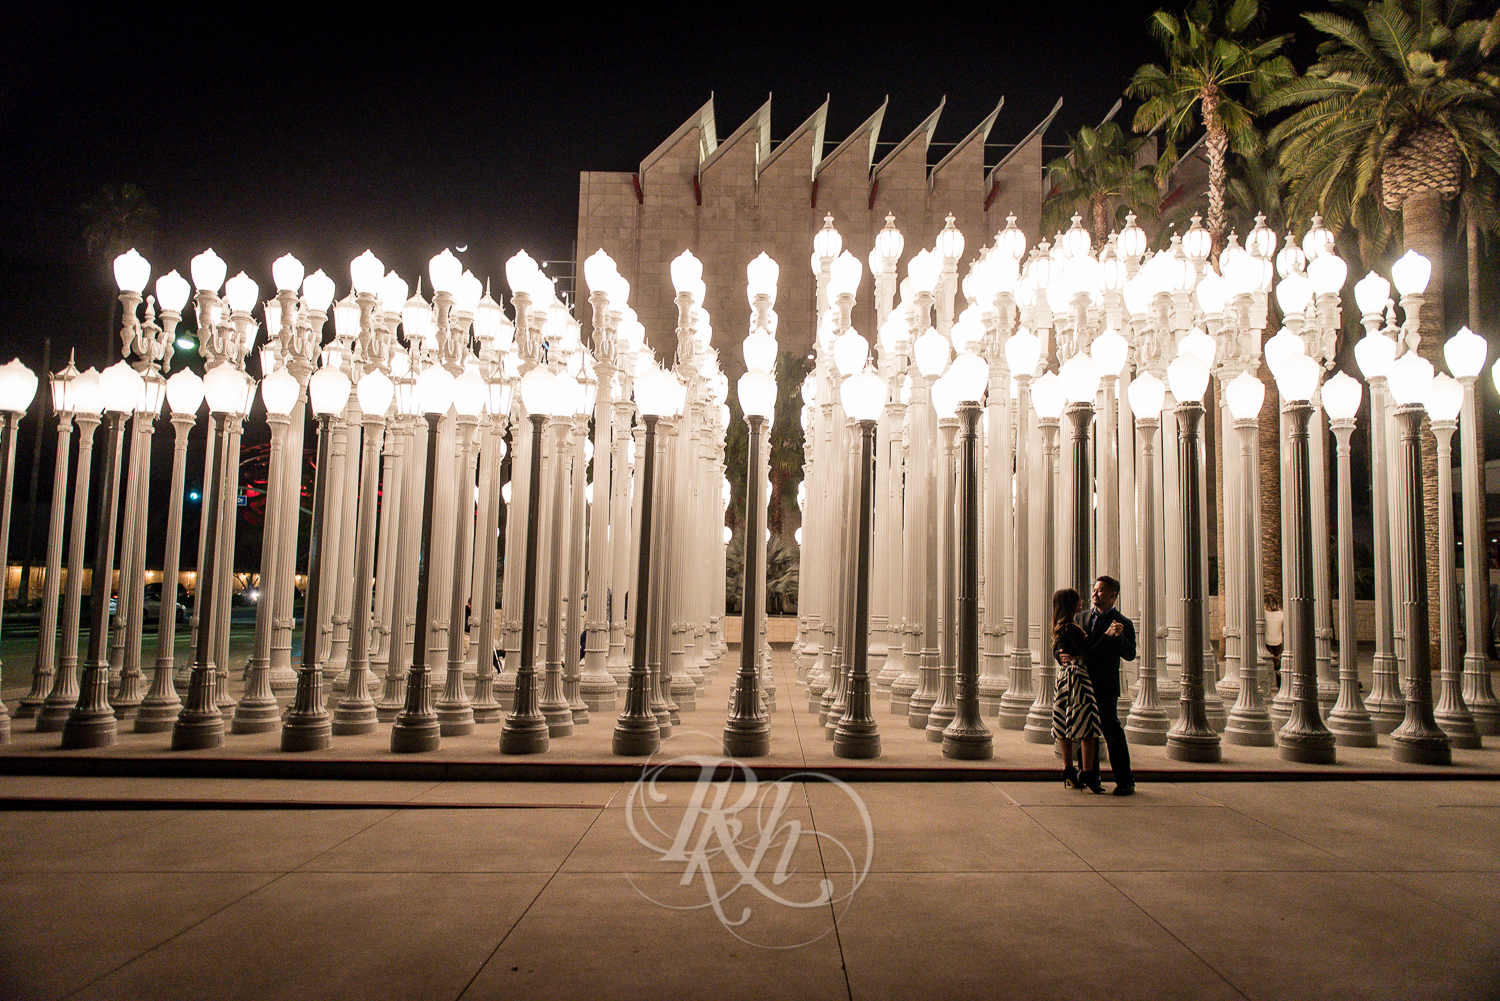  Thuy & Allen - RKH Images - Los Angeles Engagement Photography - Blog-9 